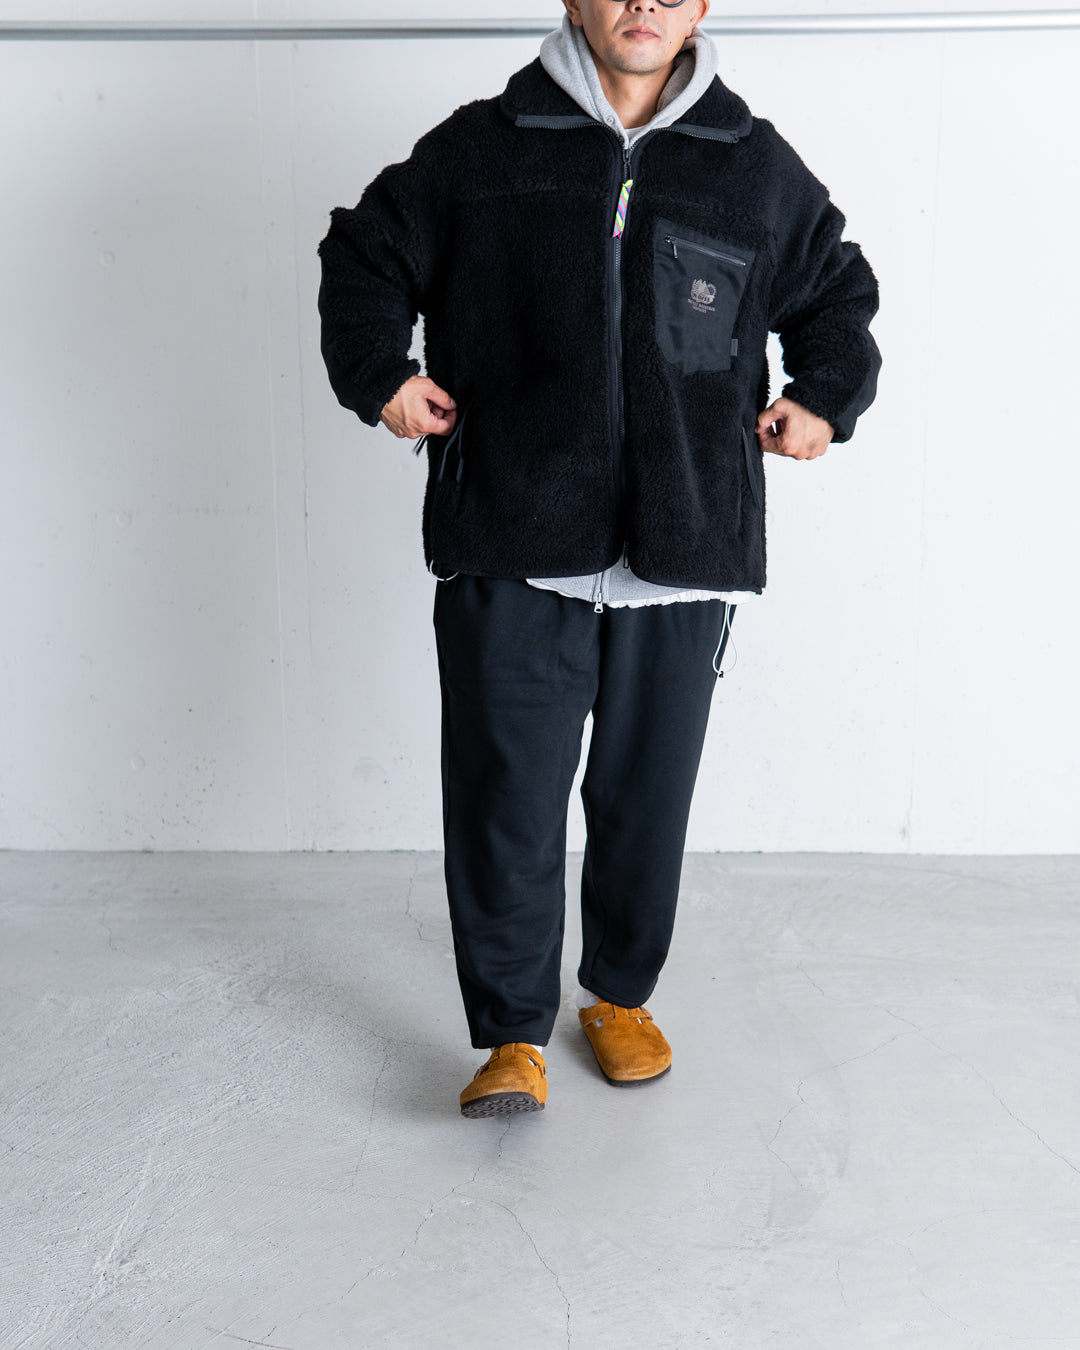 is-ness THM FLEECE JACKET is-ness×Y(dot)BY NORDISK